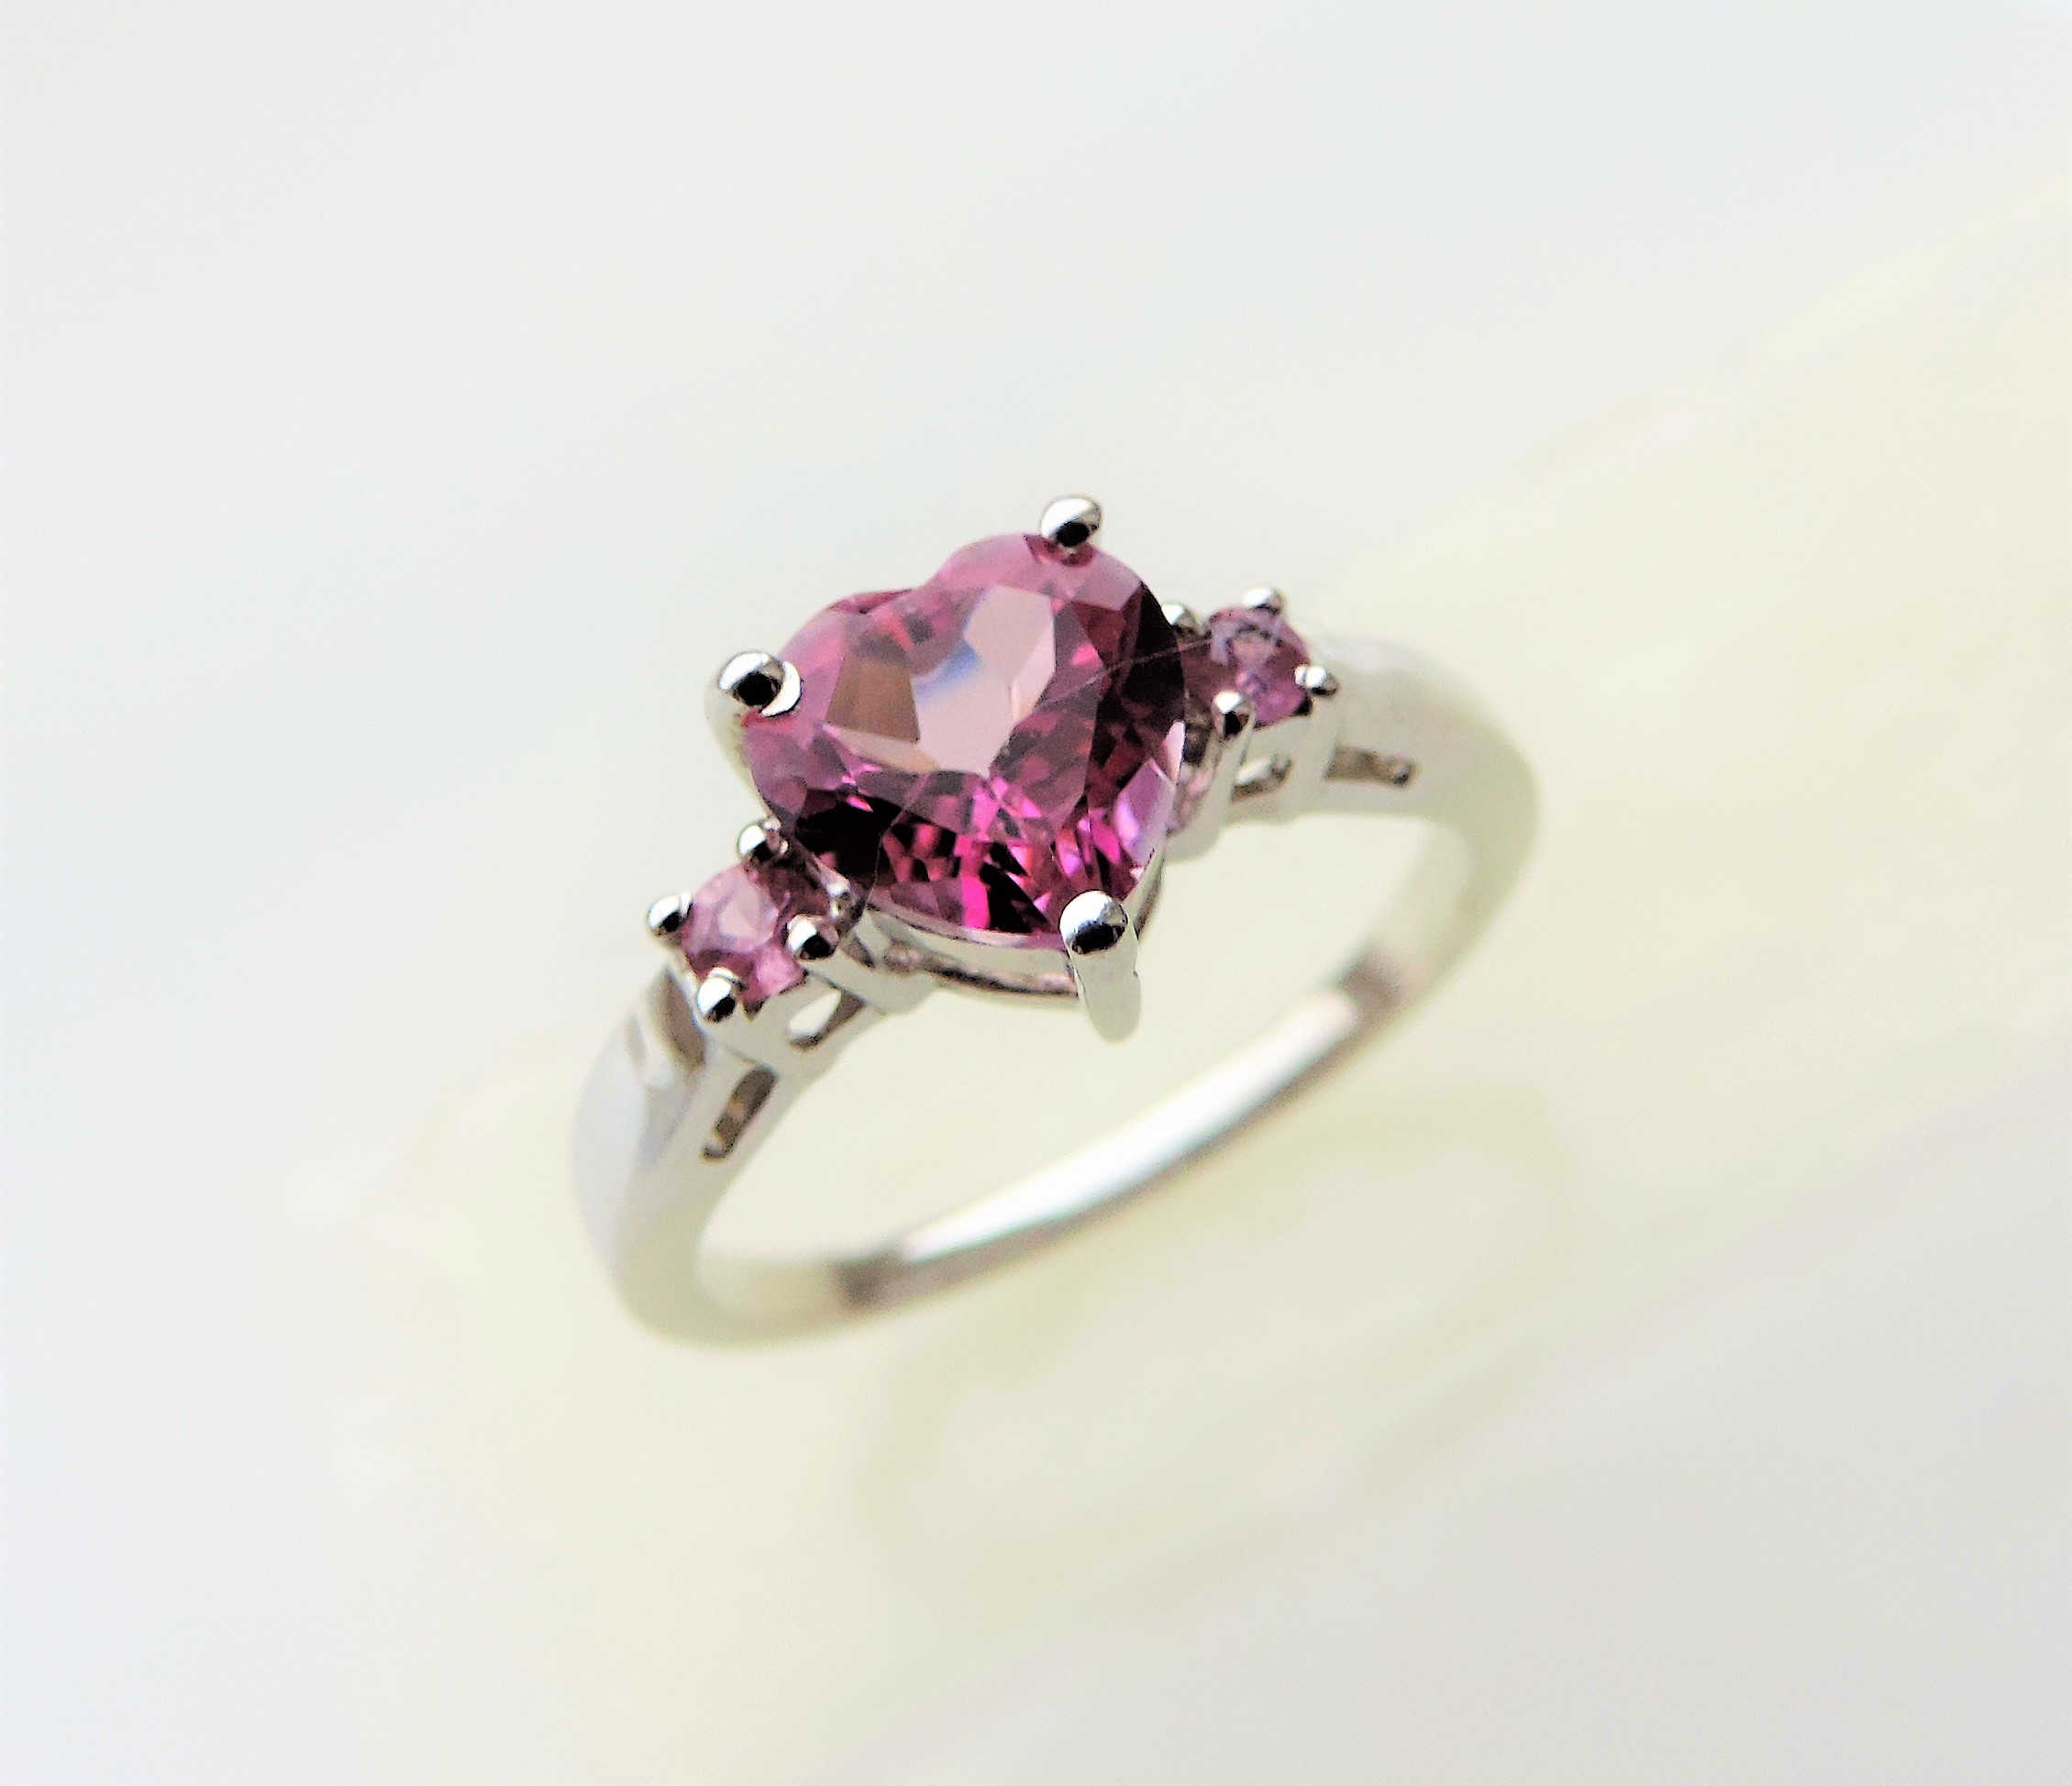 1 carat Solitaire Heart Pink Sapphire Ring - Image 4 of 5